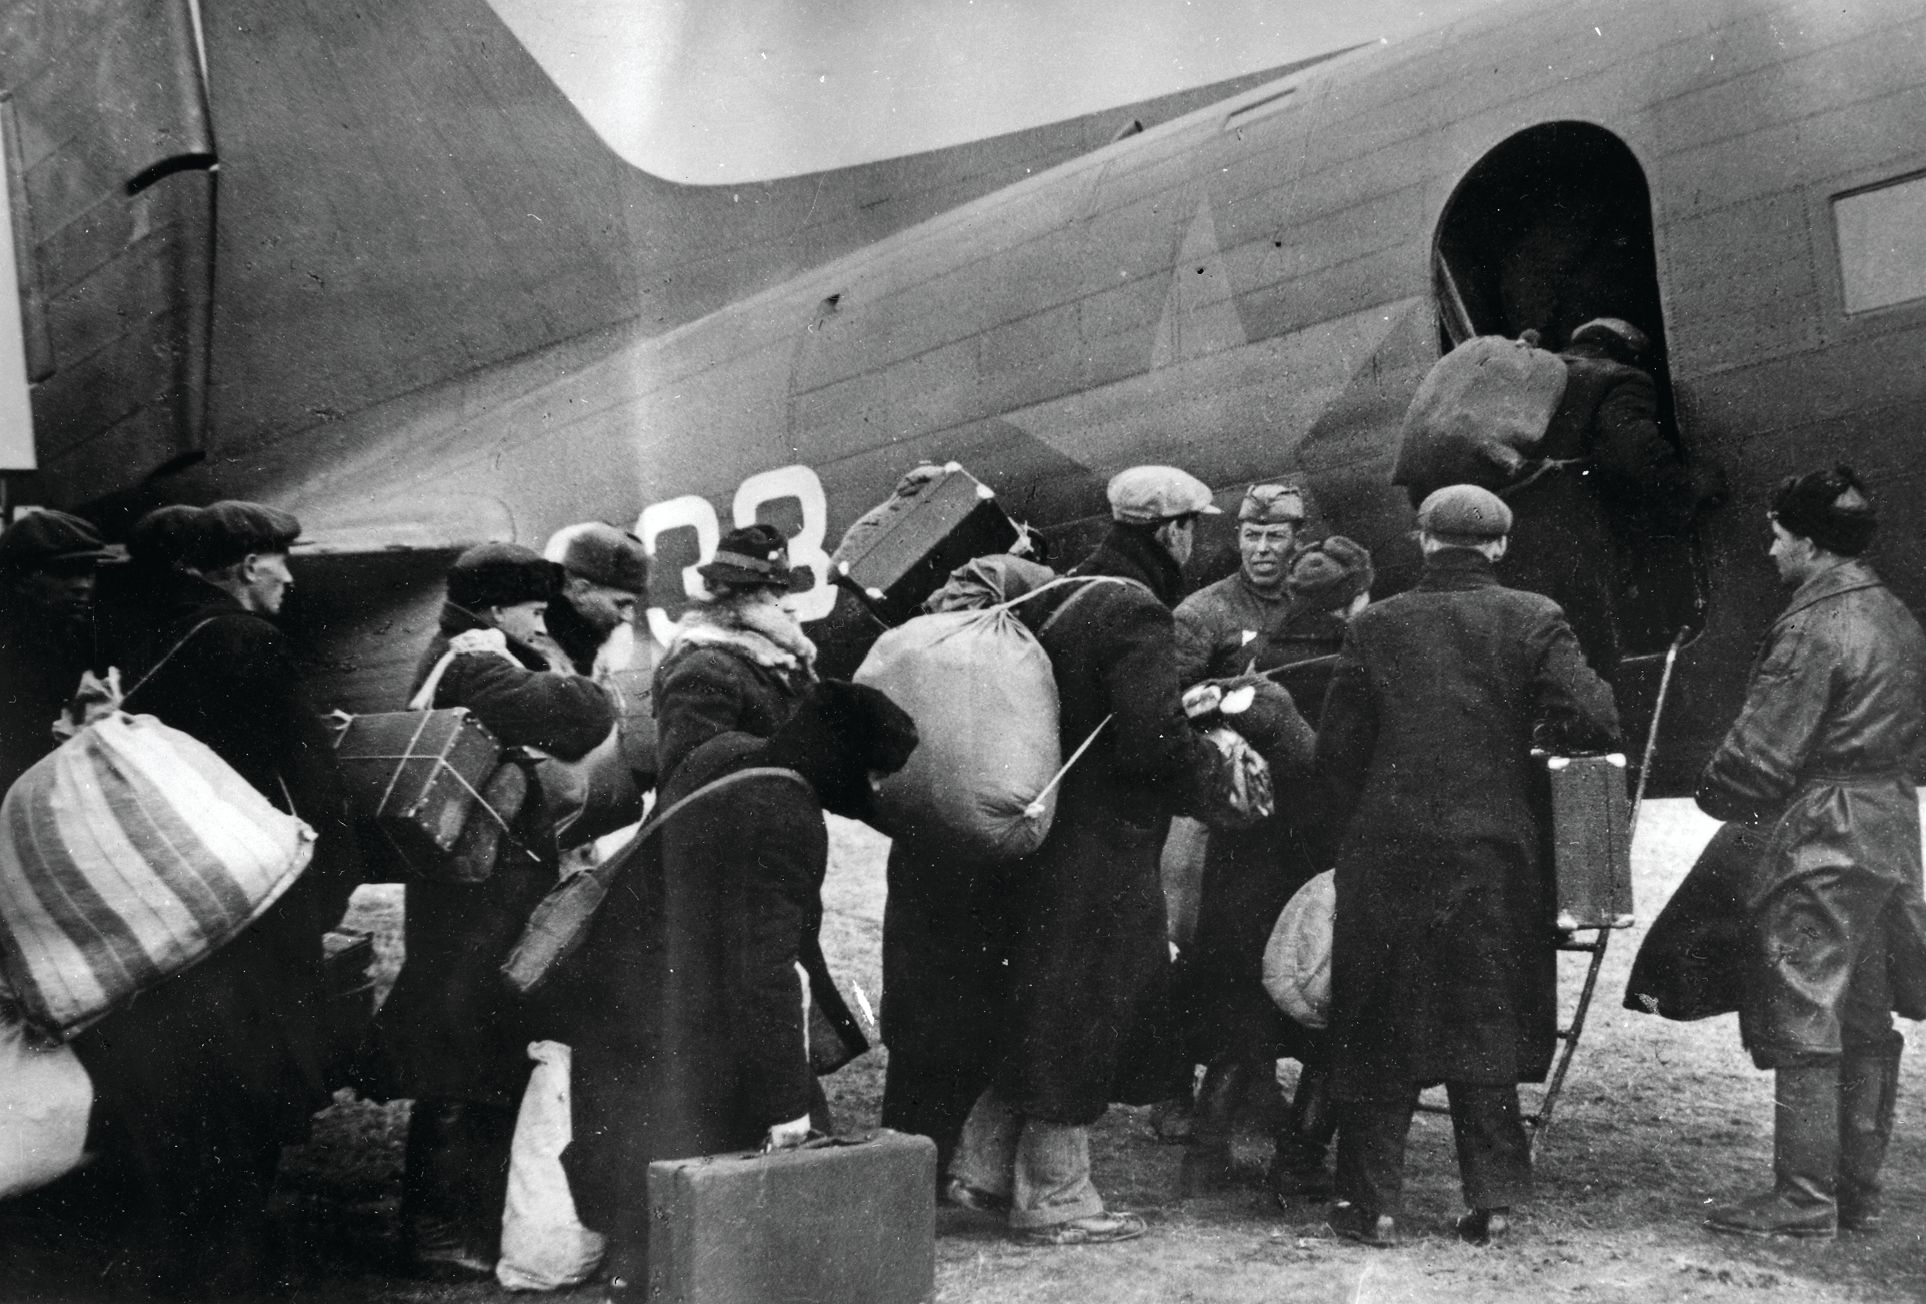 Evacuees line up to depart Leningrad in a PS-84 airplane, the Soviet version of the Douglas DC-3, October 1941.